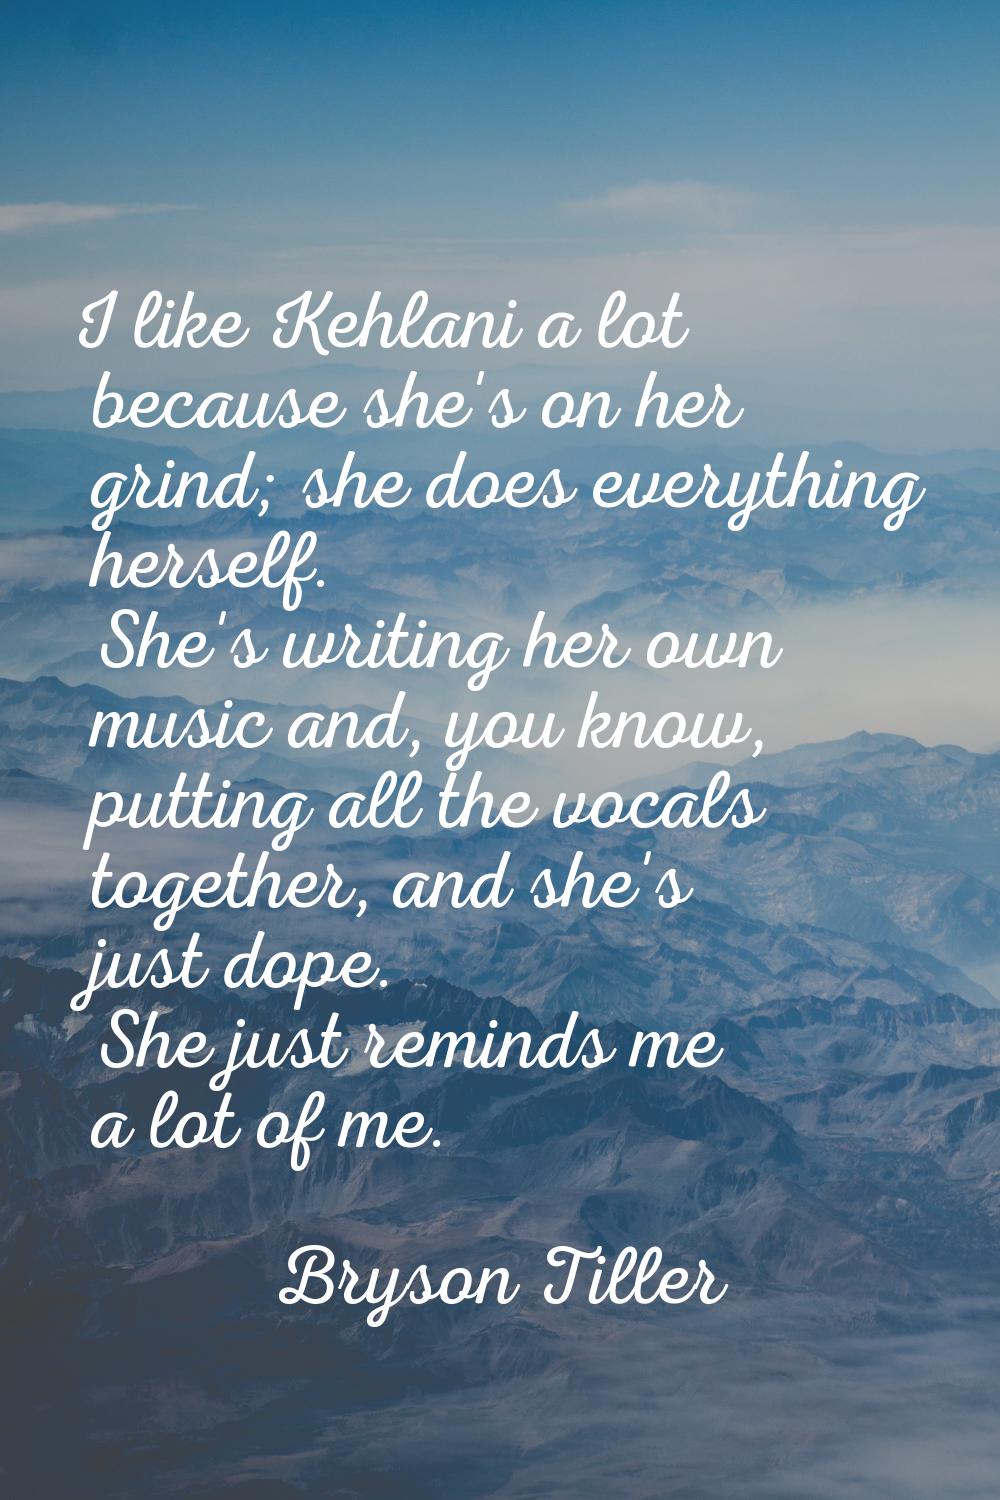 I like Kehlani a lot because she's on her grind; she does everything herself. She's writing her own